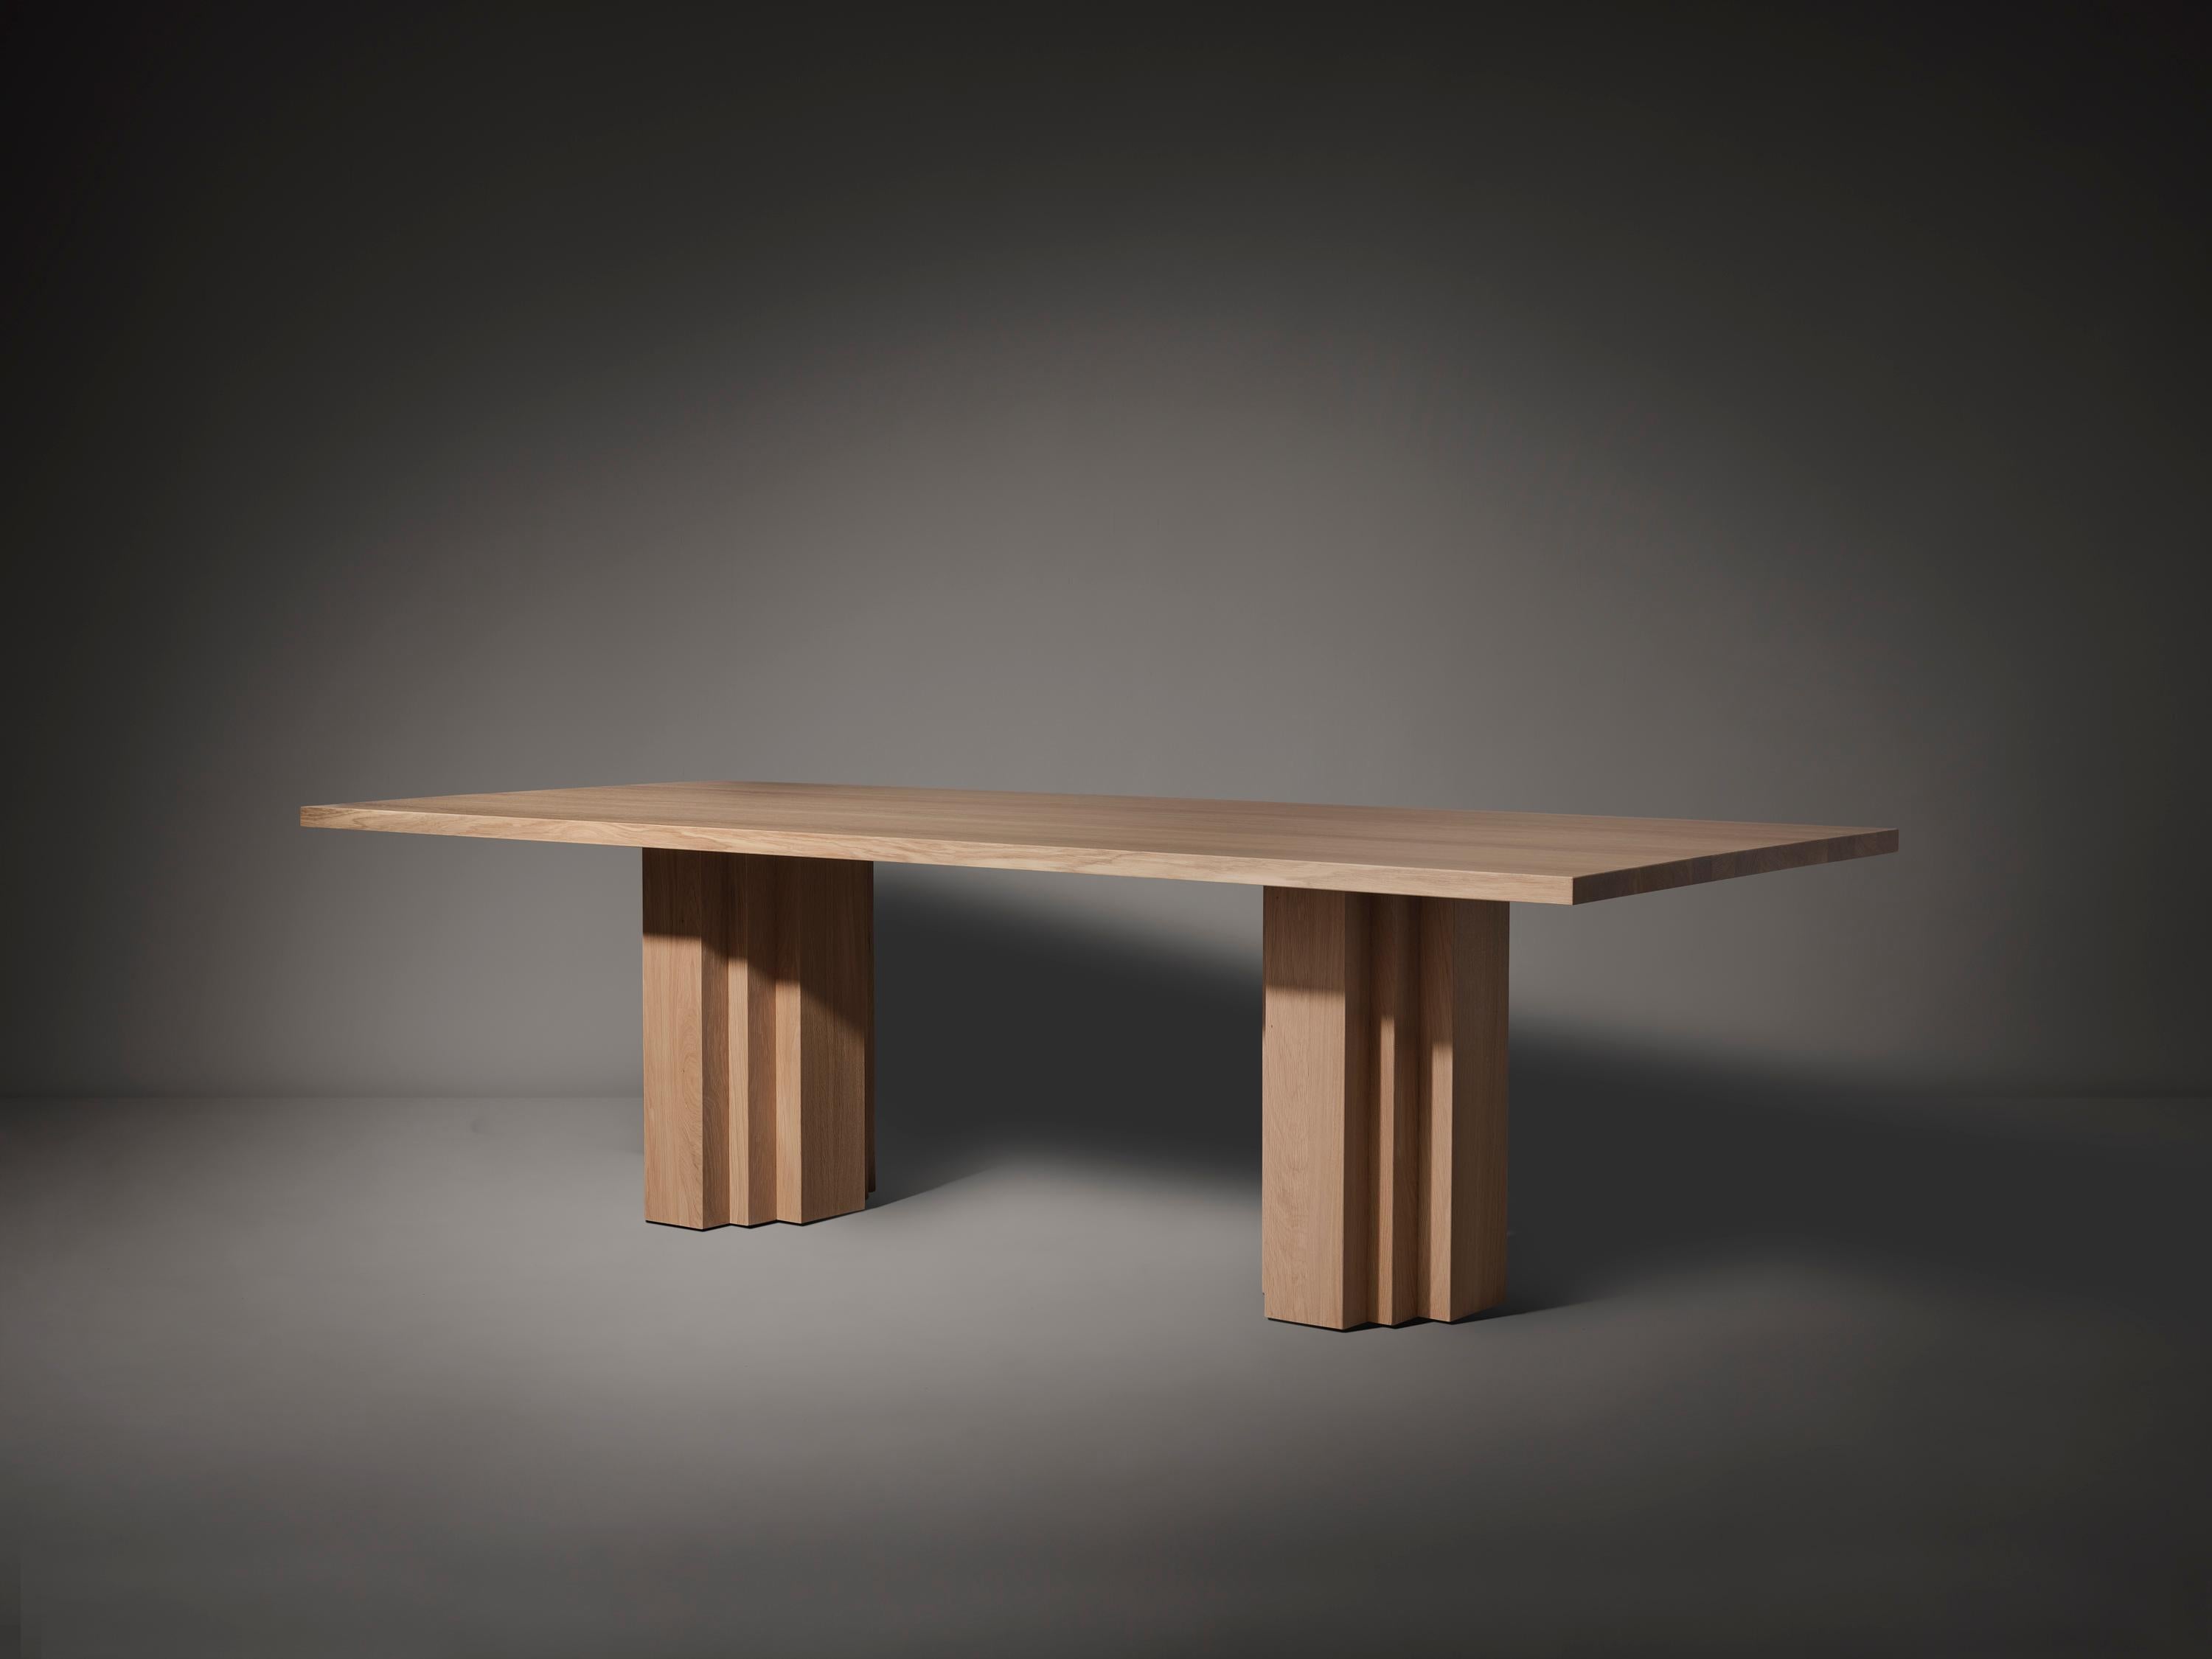 Sculptural Solid Oak Wooden Brut Dining Dable - Black In New Condition For Sale In Amsterdam, NL